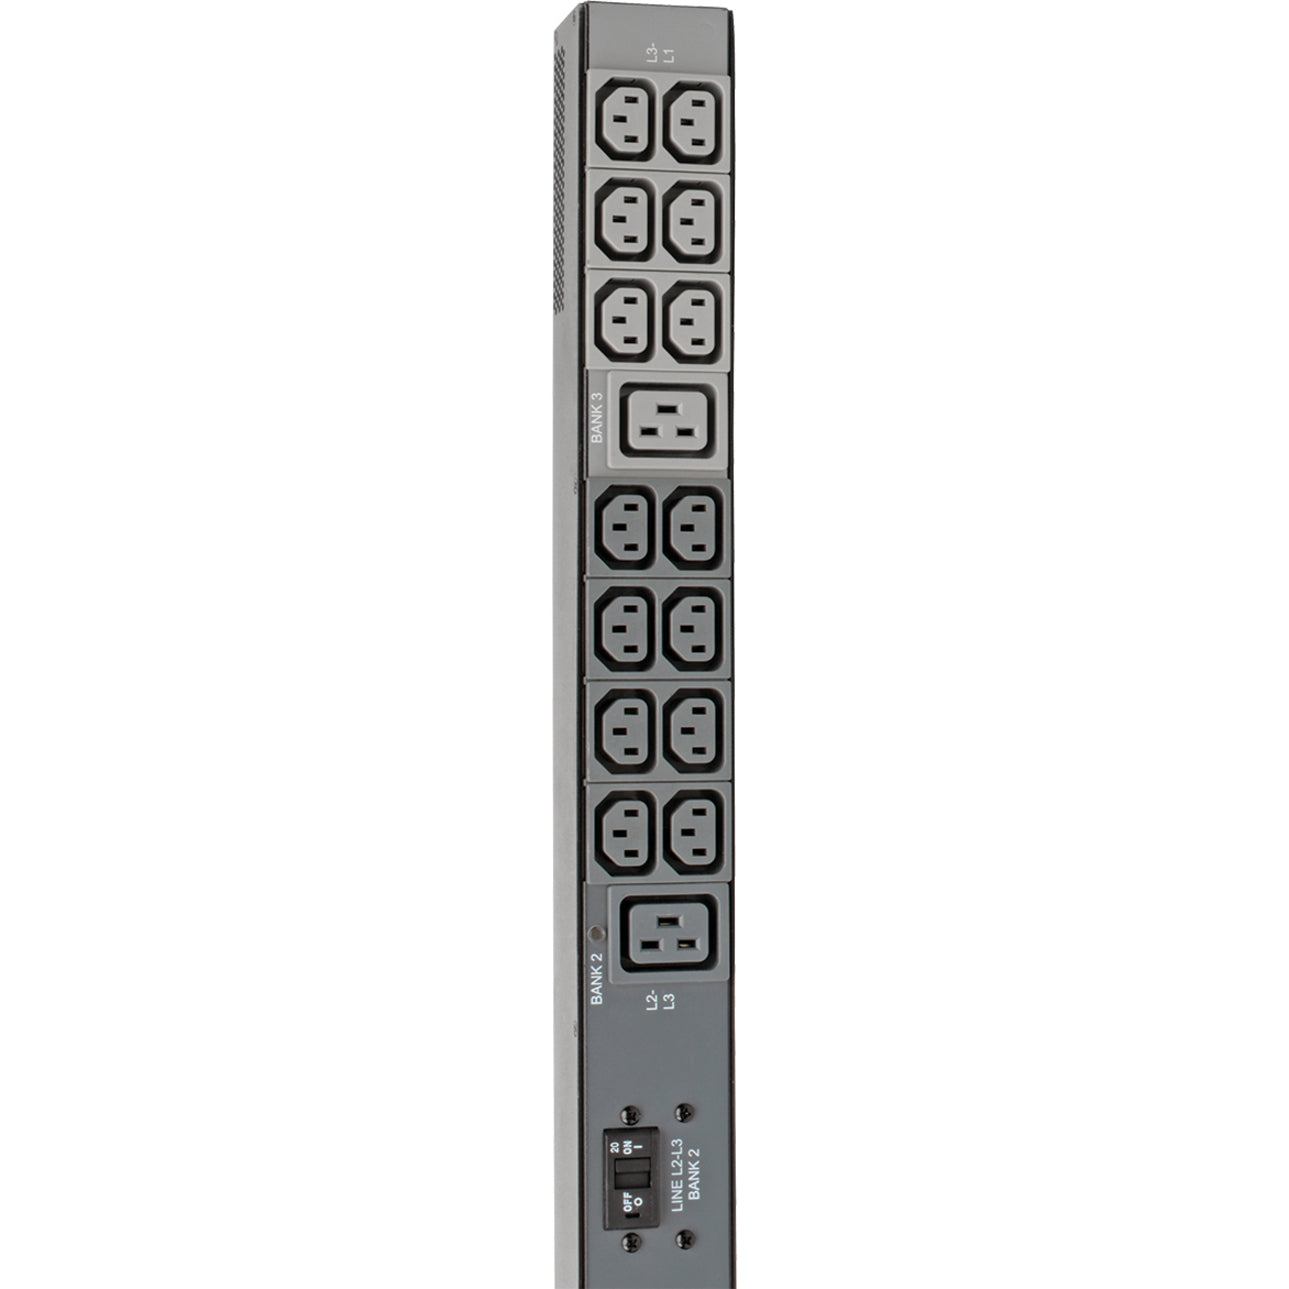 Tripp Lite PDU3EVN10l1530B 48-Outlet PDU, 10 kW Power Rating, Monitored, Three Phase